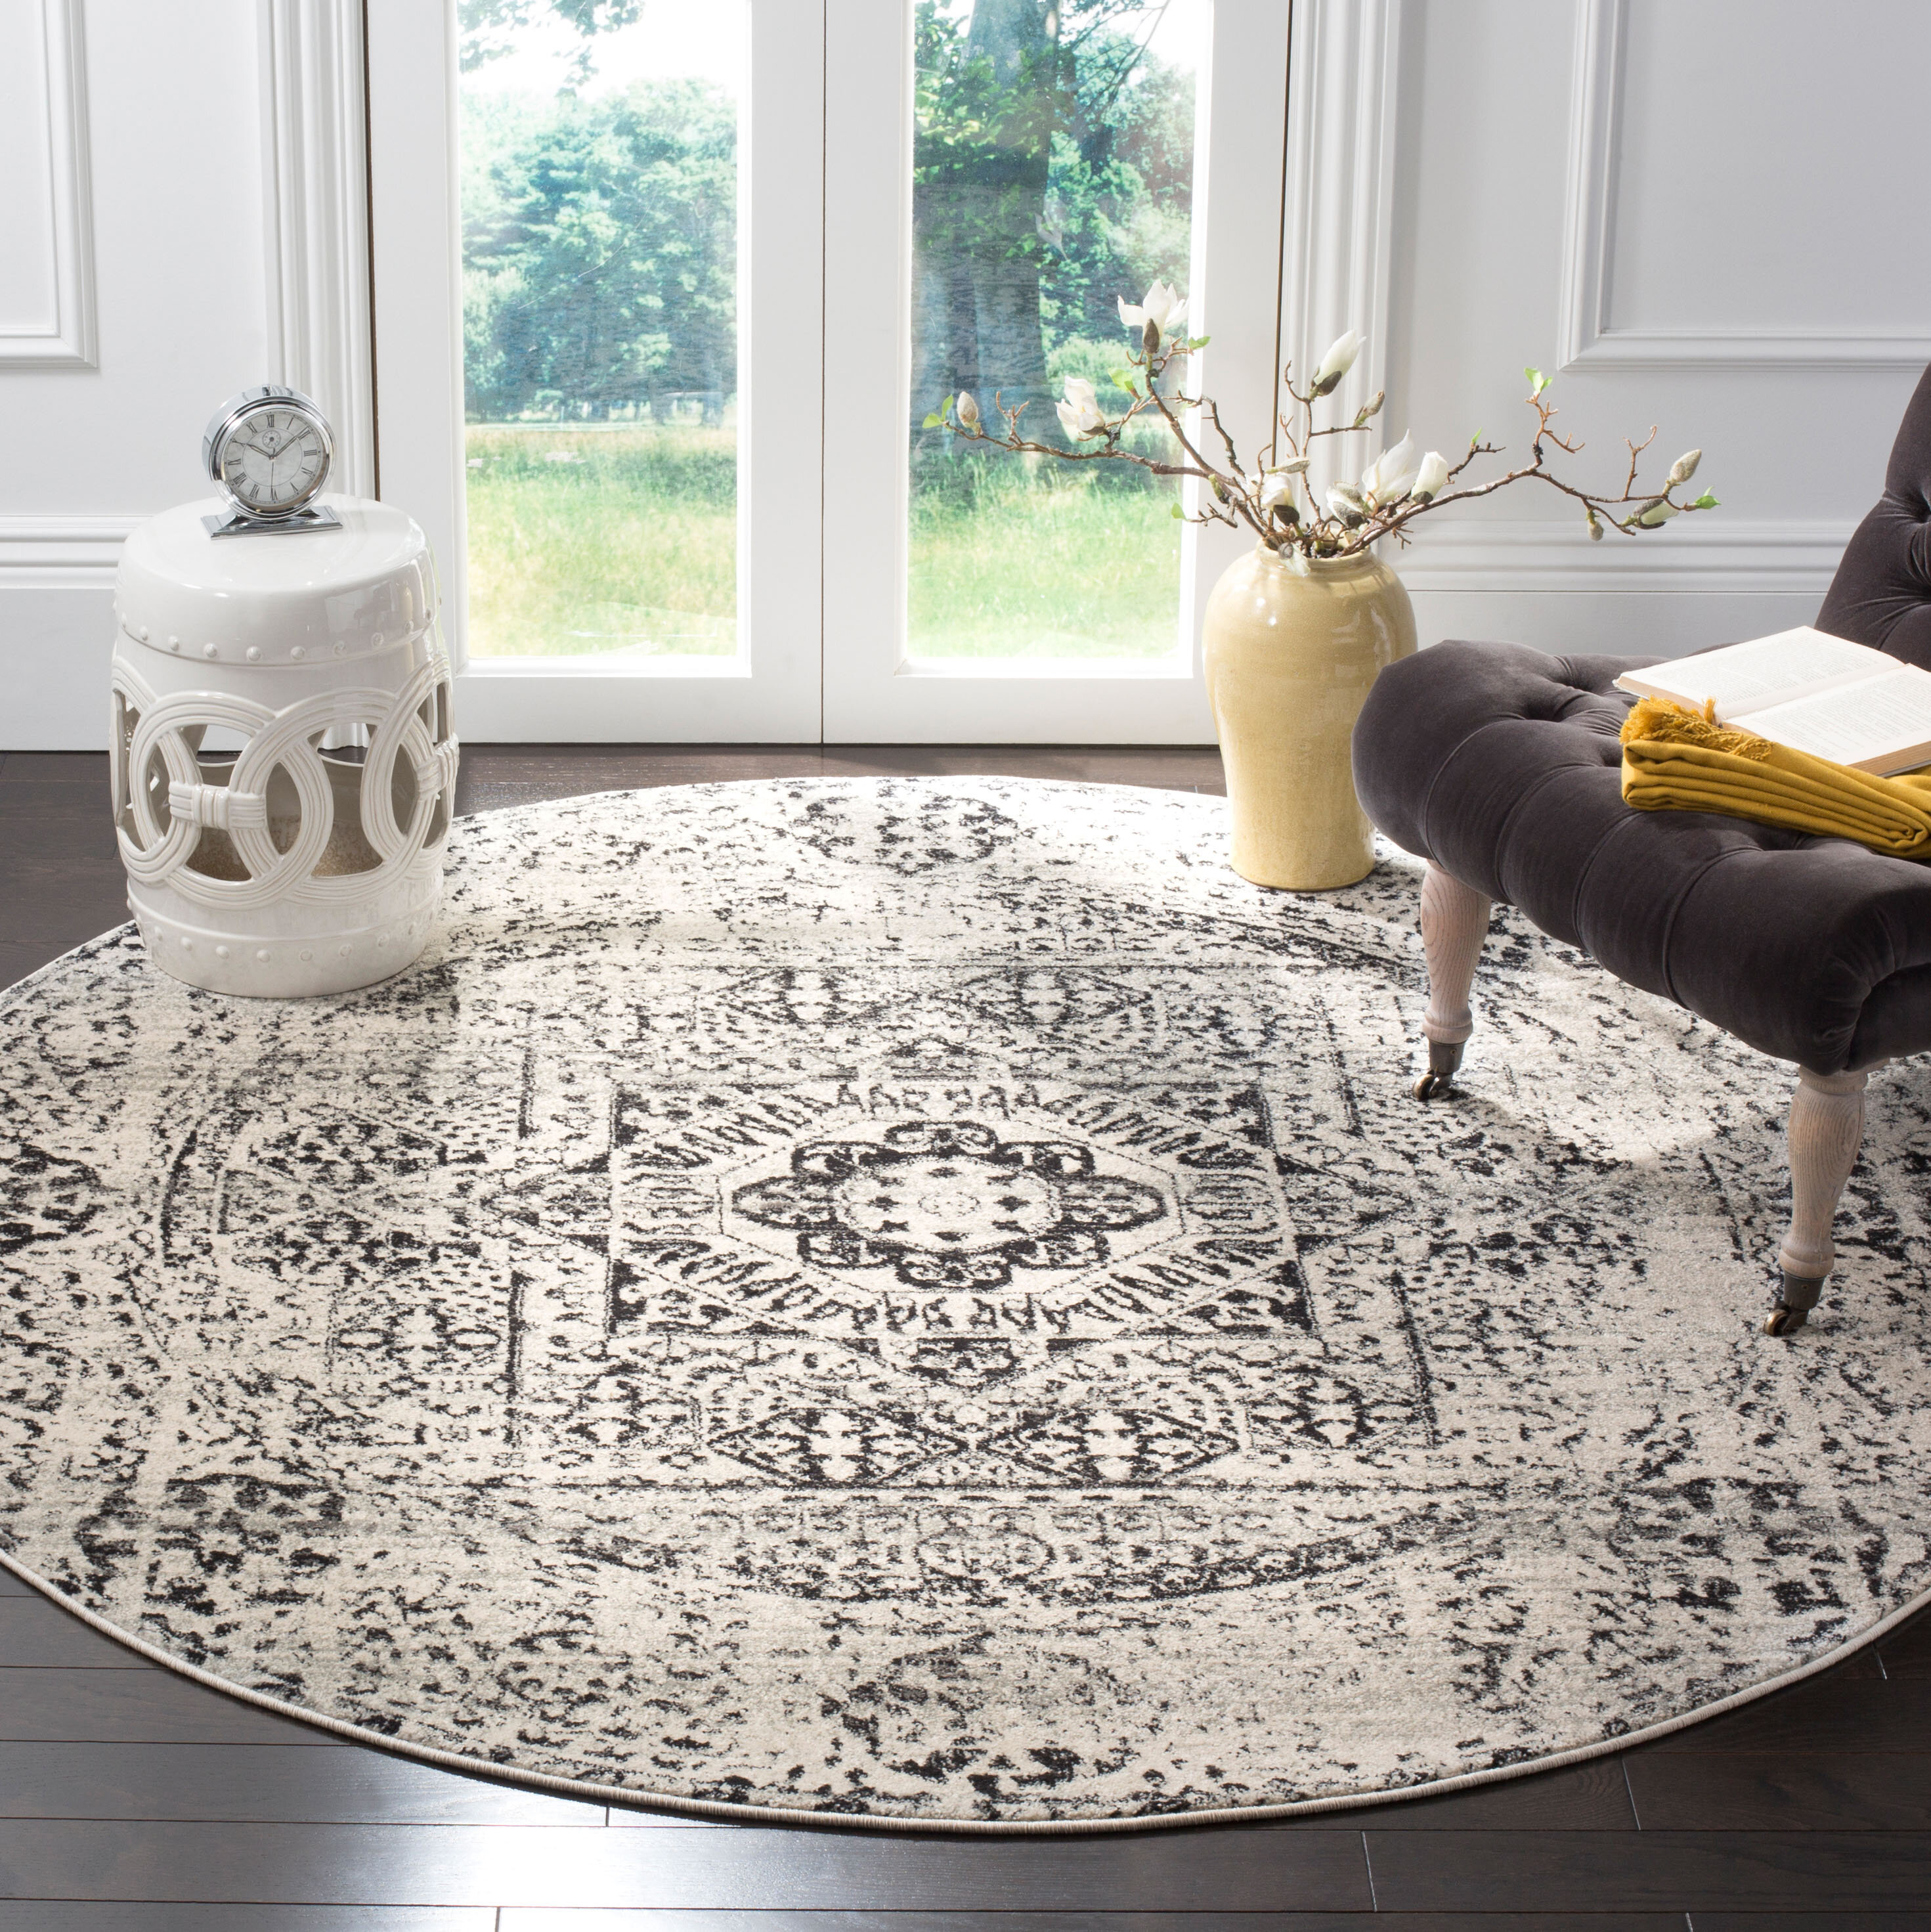 Round Floor Mat Living Room Area Rugs Afro African American Black Woman Pattern